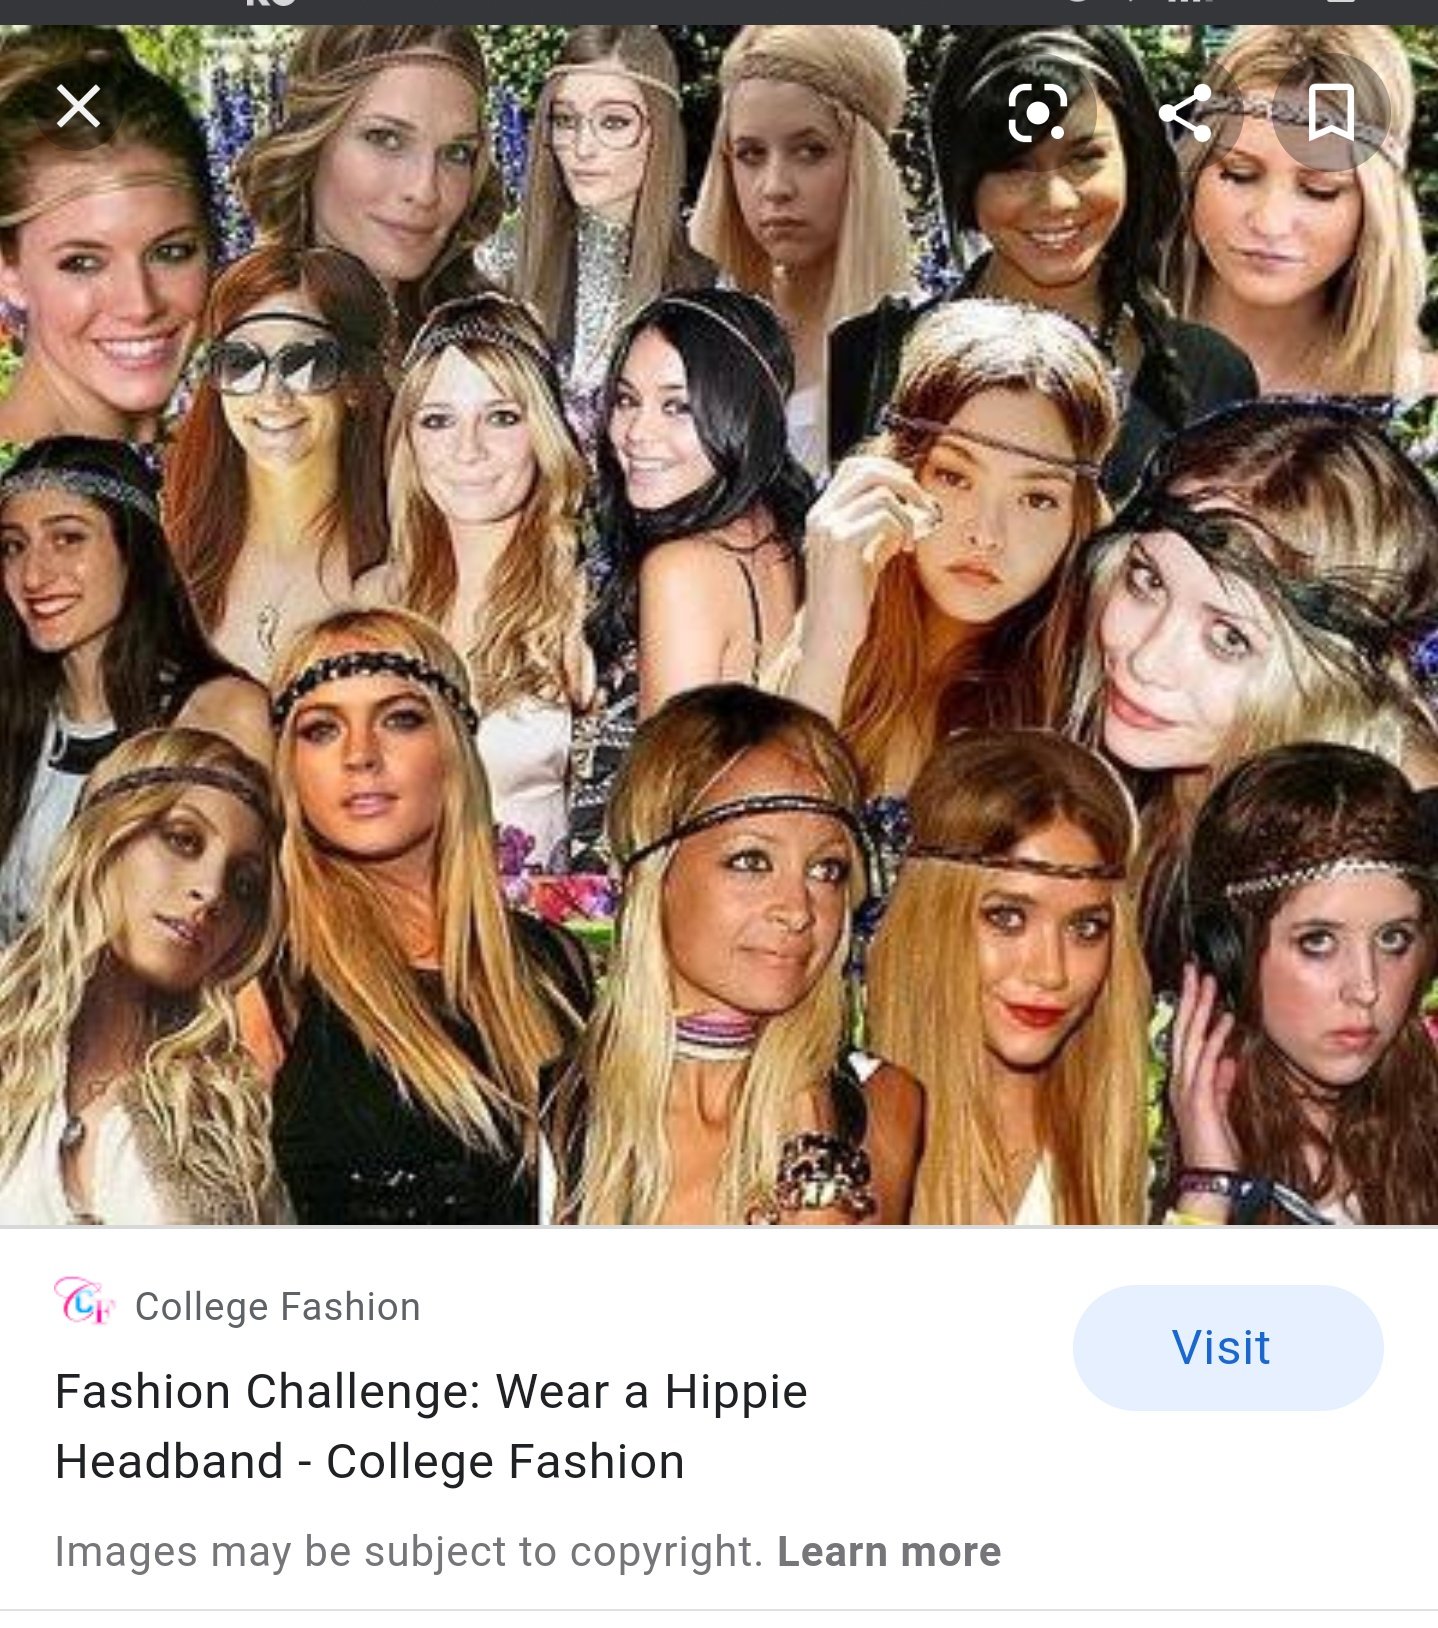 𝕸𝖔𝖗𝖊 𝖆𝖓𝖉 𝕸𝖔𝖗𝖊 Before You Accused Twice Of Cultural Appropriation You Should Check The Differences Between Native American Headdress And Hippie Headbands Moreandmore Twice T Co 10ovq3dzfz Twitter